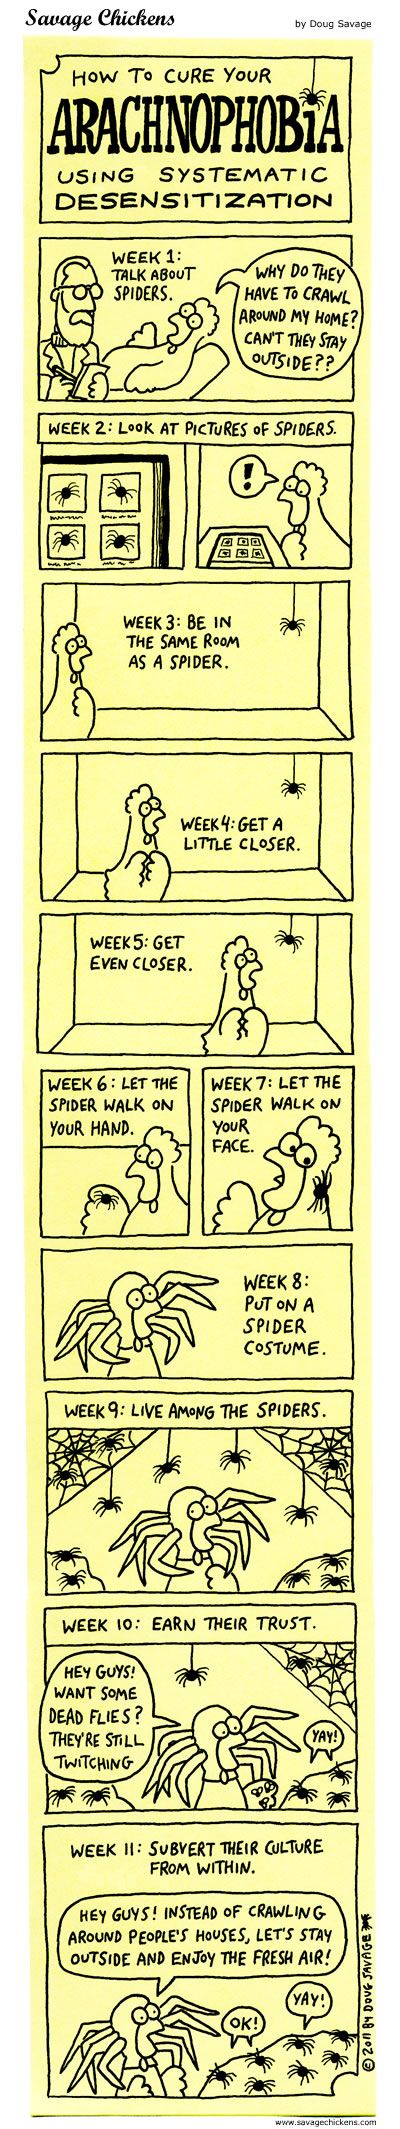 How to cure your arachnophobia.